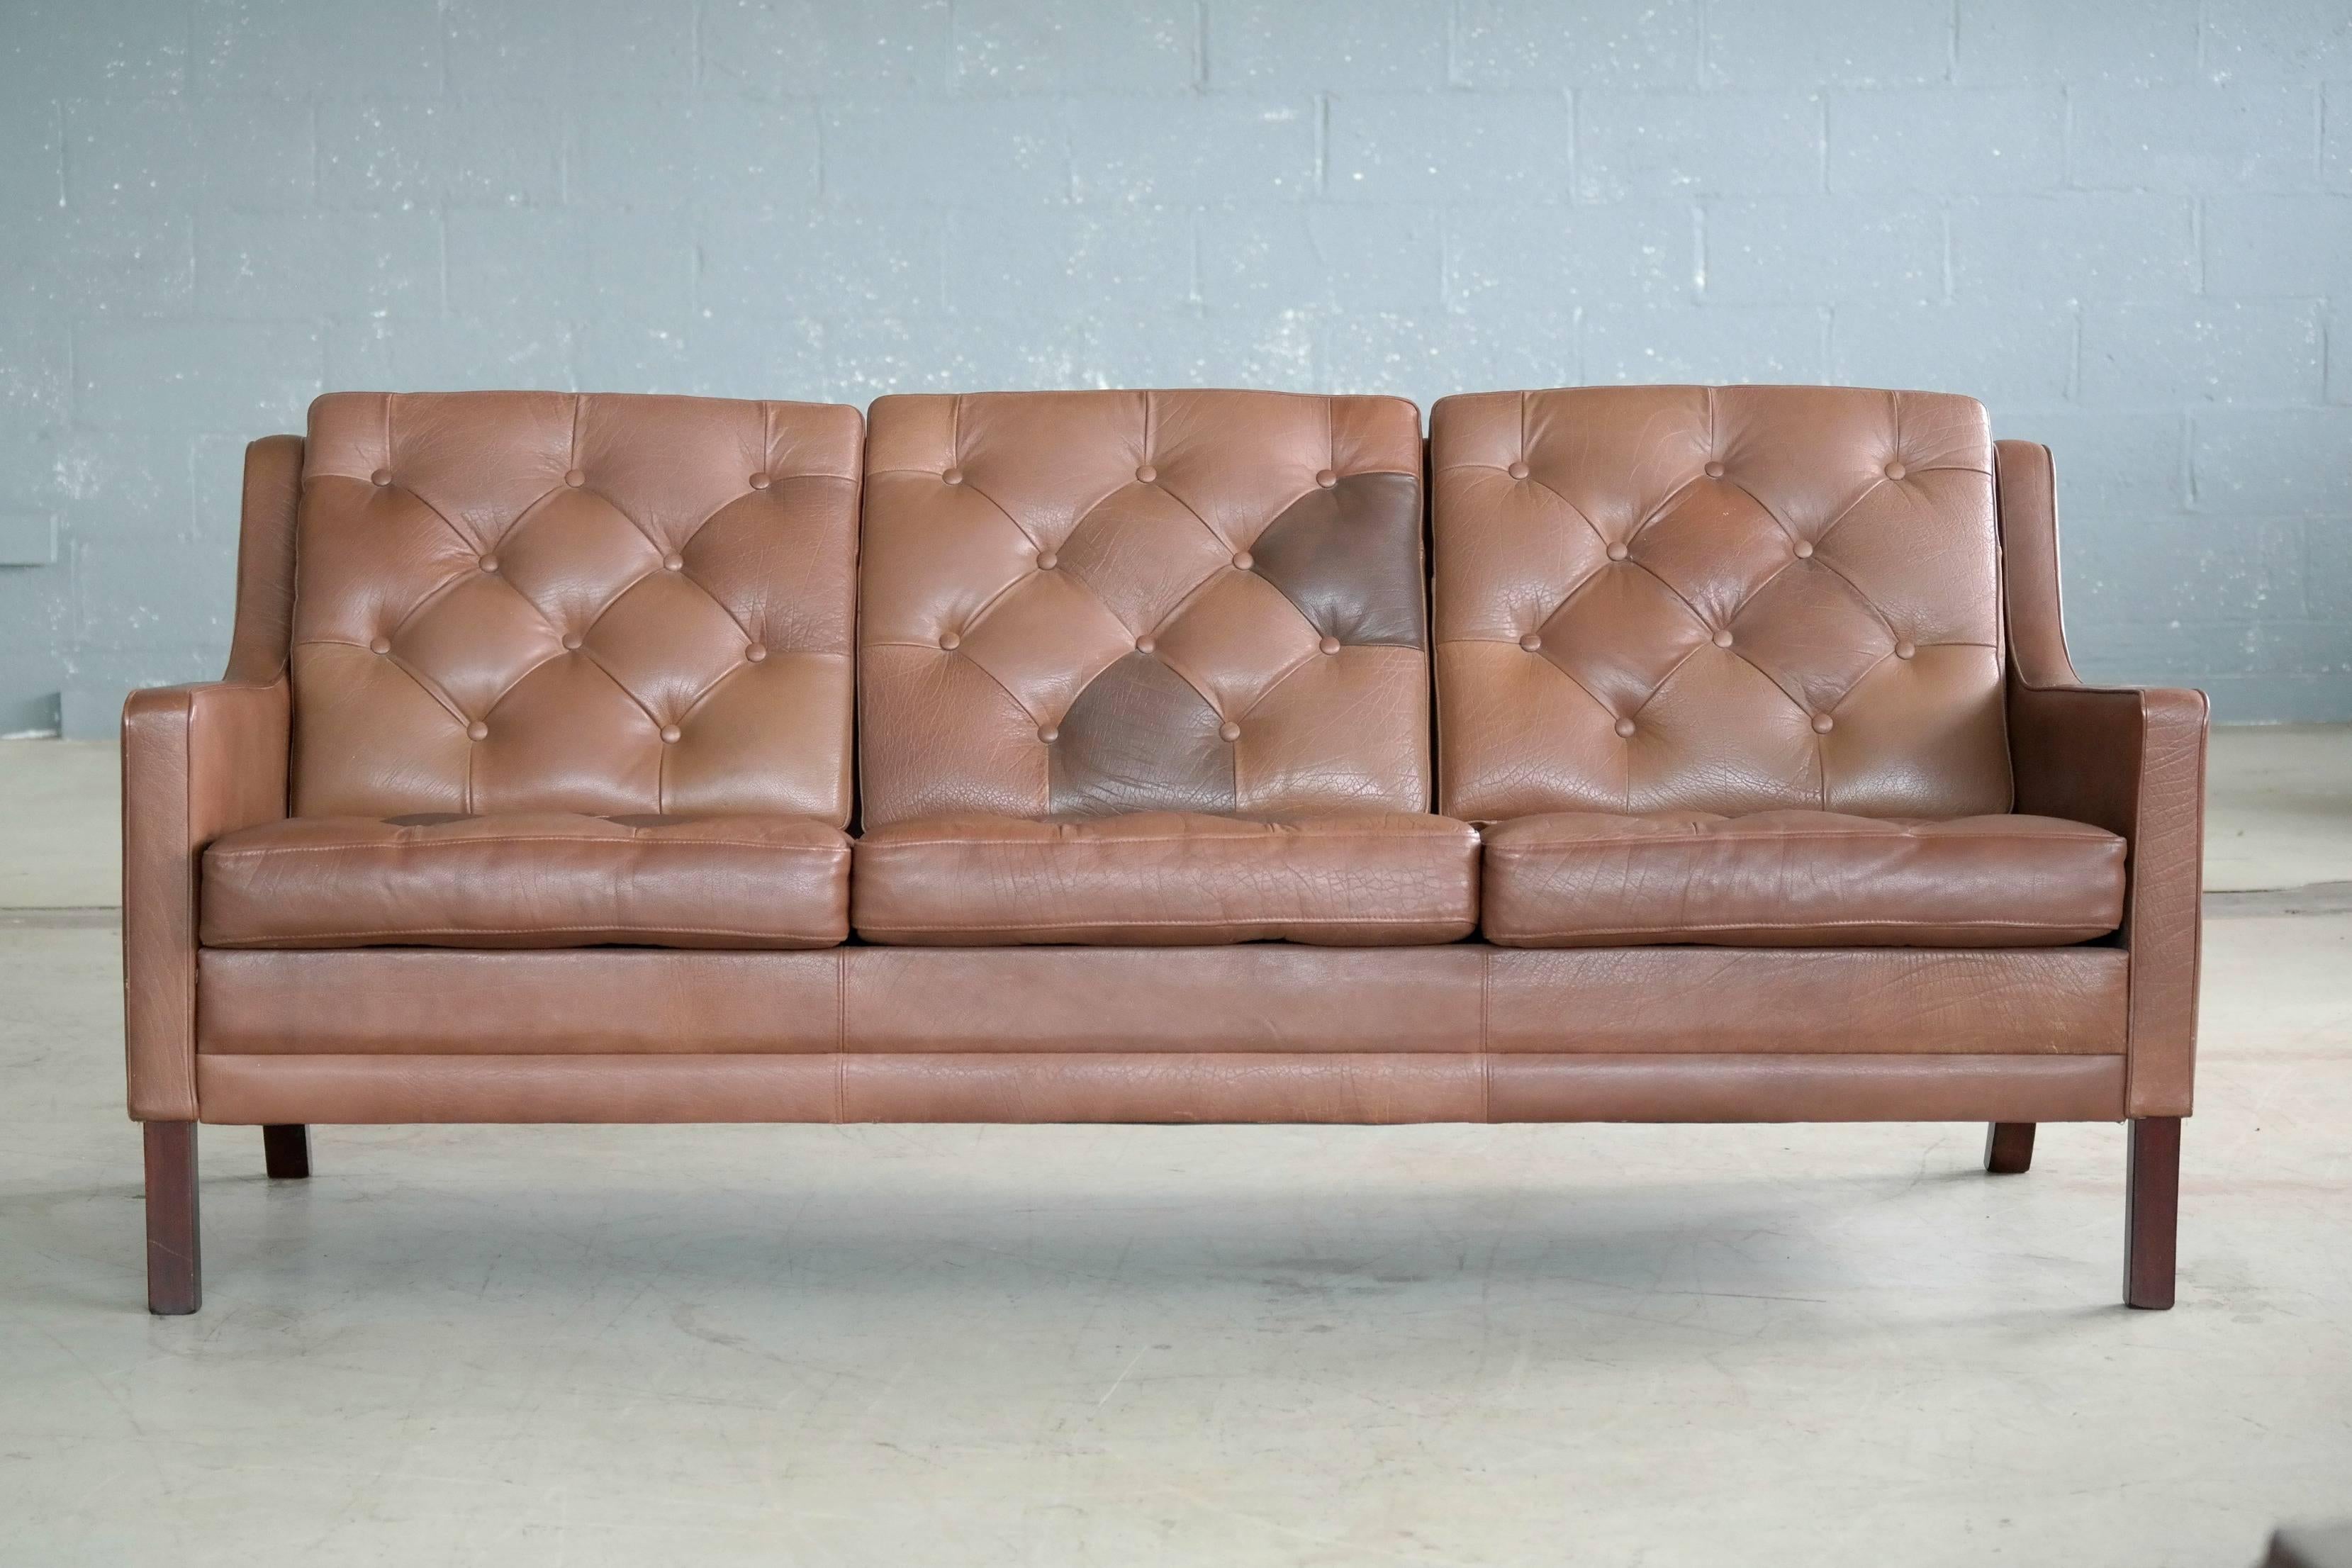 Great Ib Kofod-Larsen design with beautifully tufted patchwork cushions with leather buttons. Nice buffalo leather in very good condition. The sofa has nice patina and no cracking or crazing but the color it not quite uniform as some of the leather